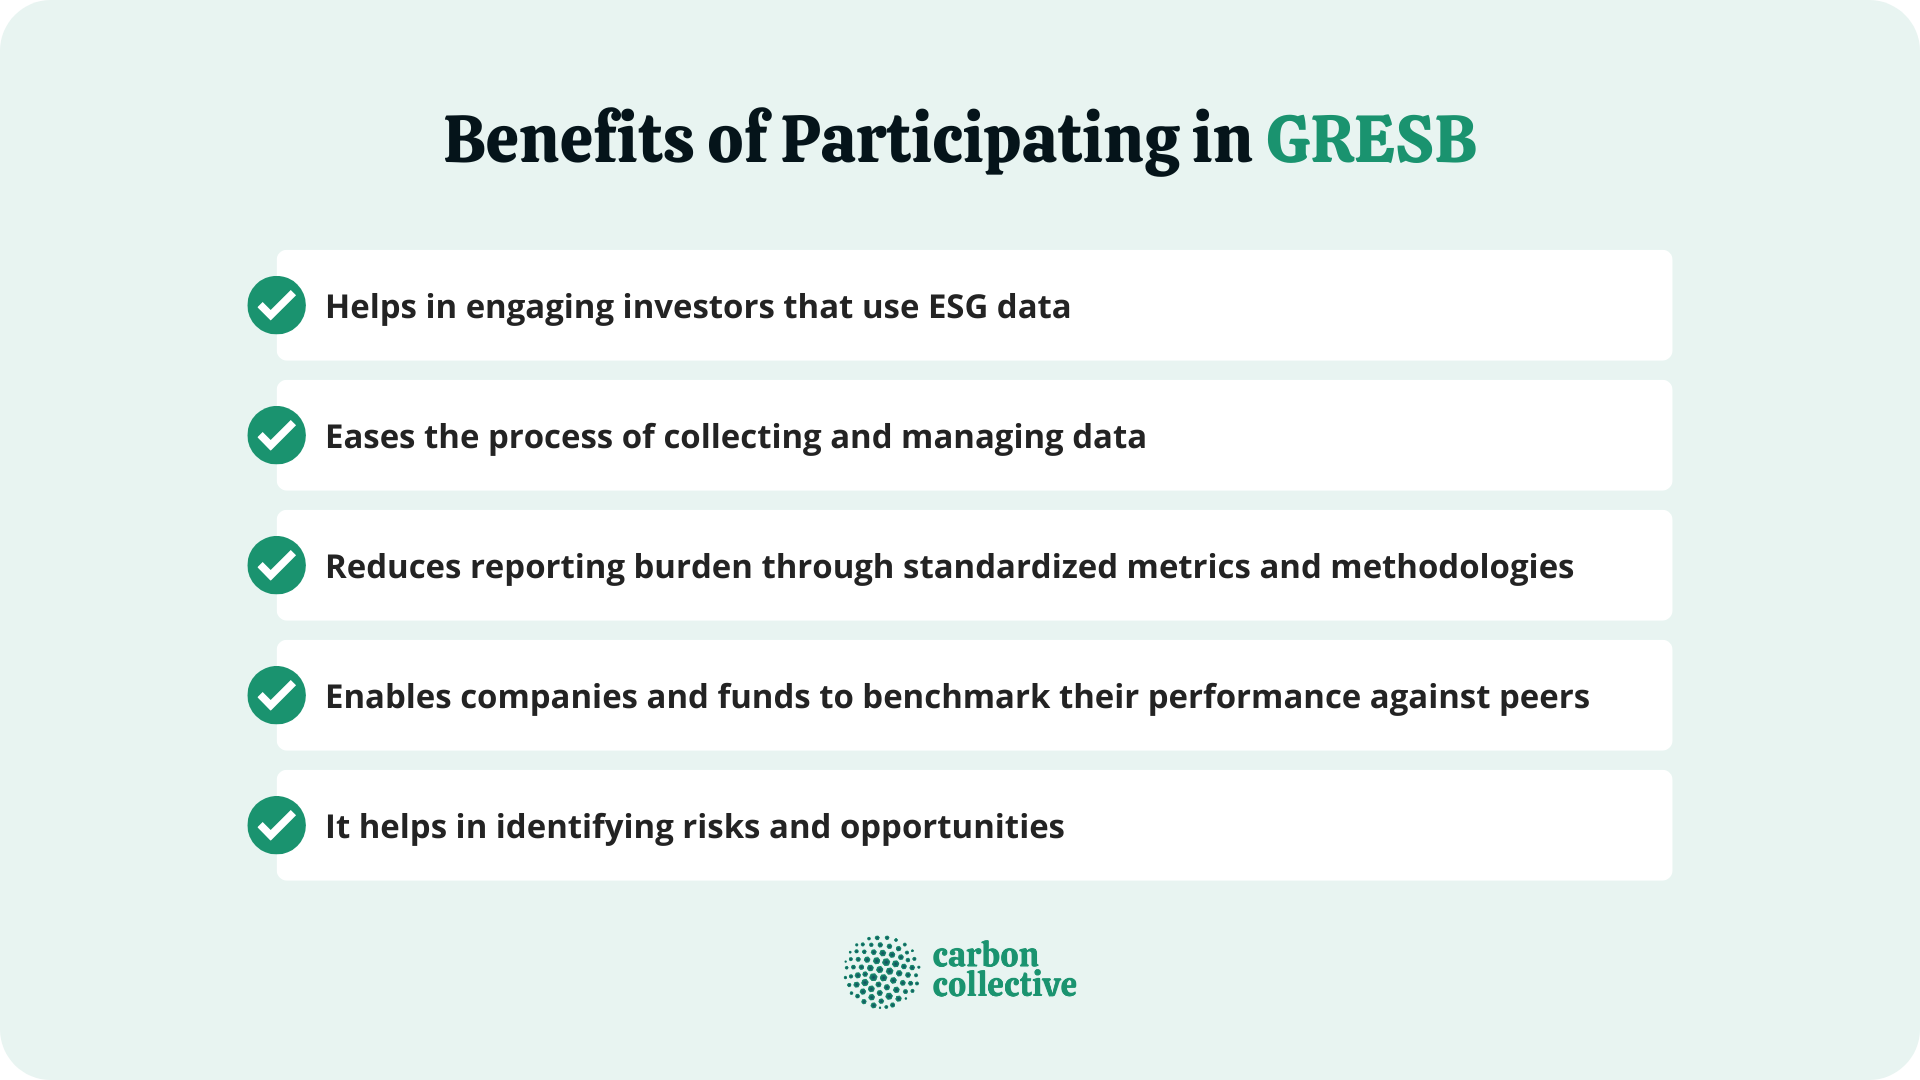 Benefits_of_Participating_in_GRESB